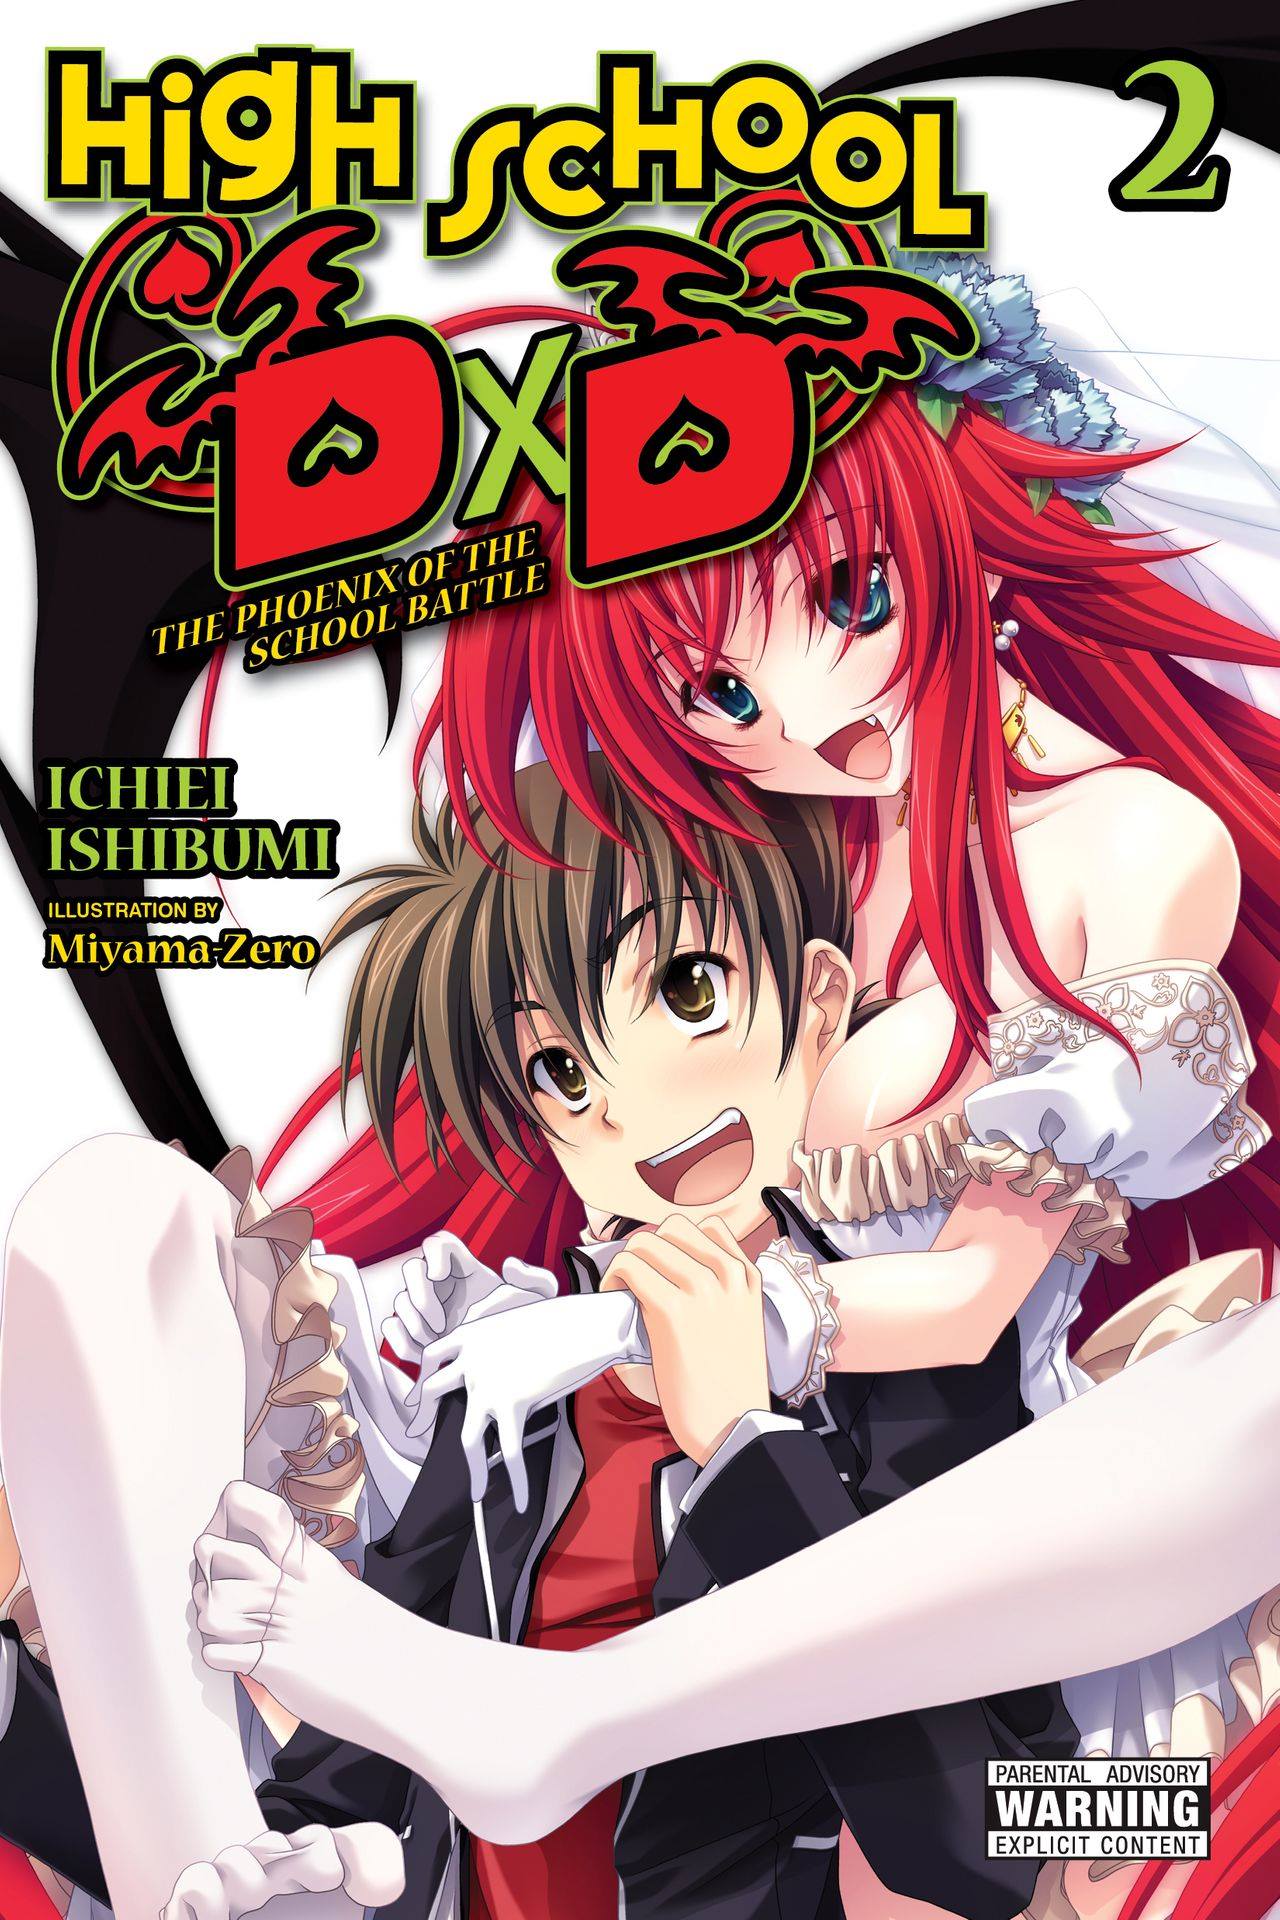 essay from high school dxd